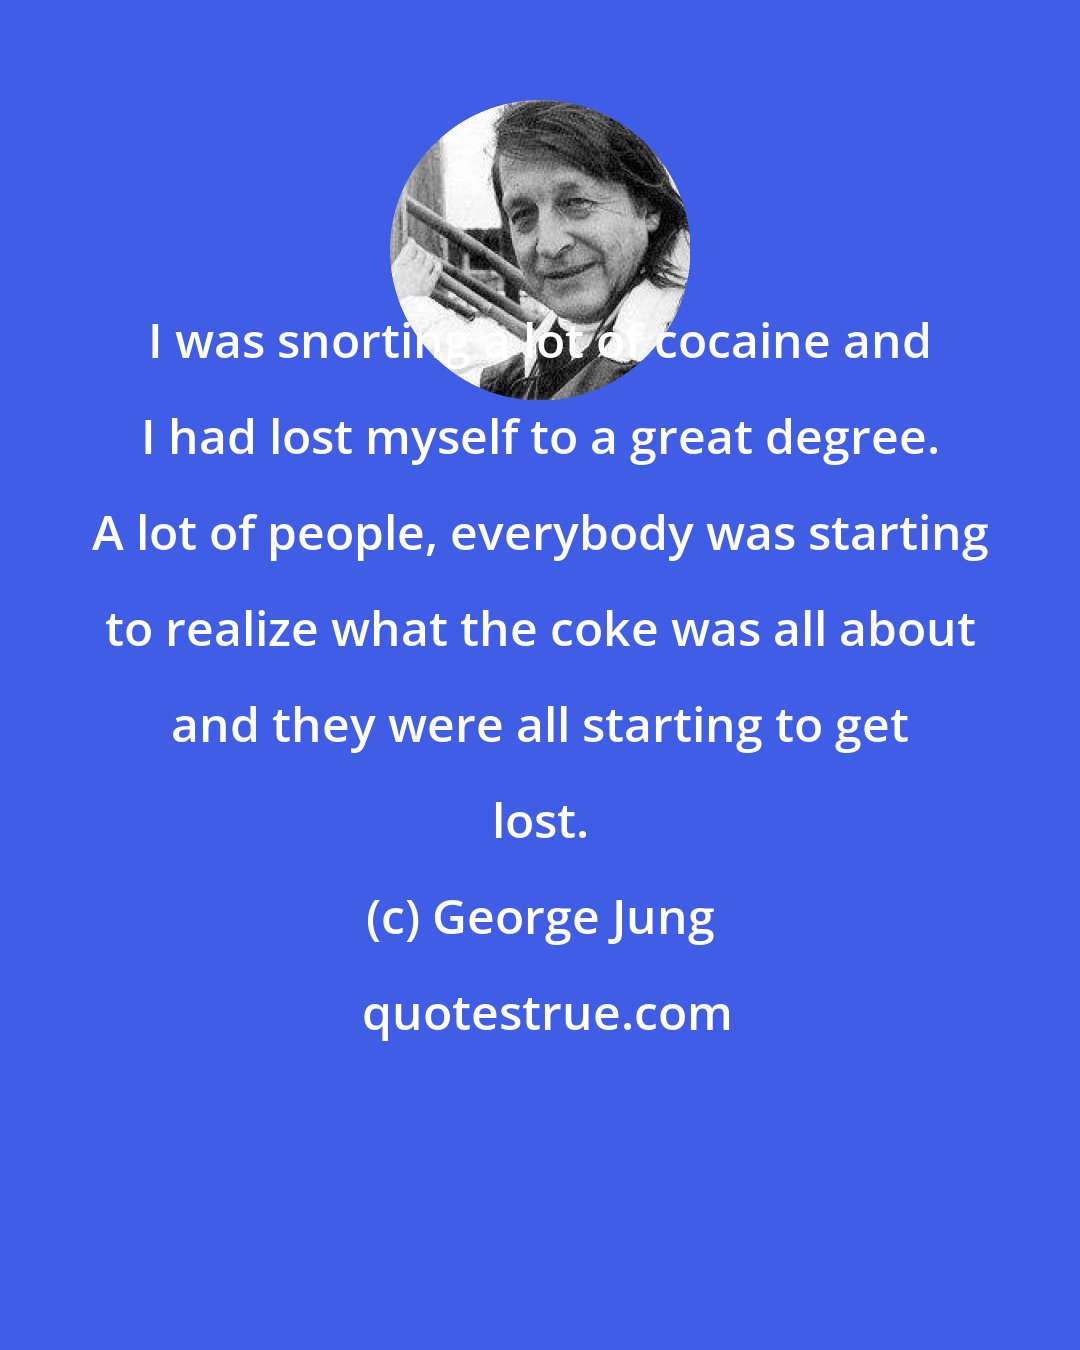 George Jung: I was snorting a lot of cocaine and I had lost myself to a great degree. A lot of people, everybody was starting to realize what the coke was all about and they were all starting to get lost.